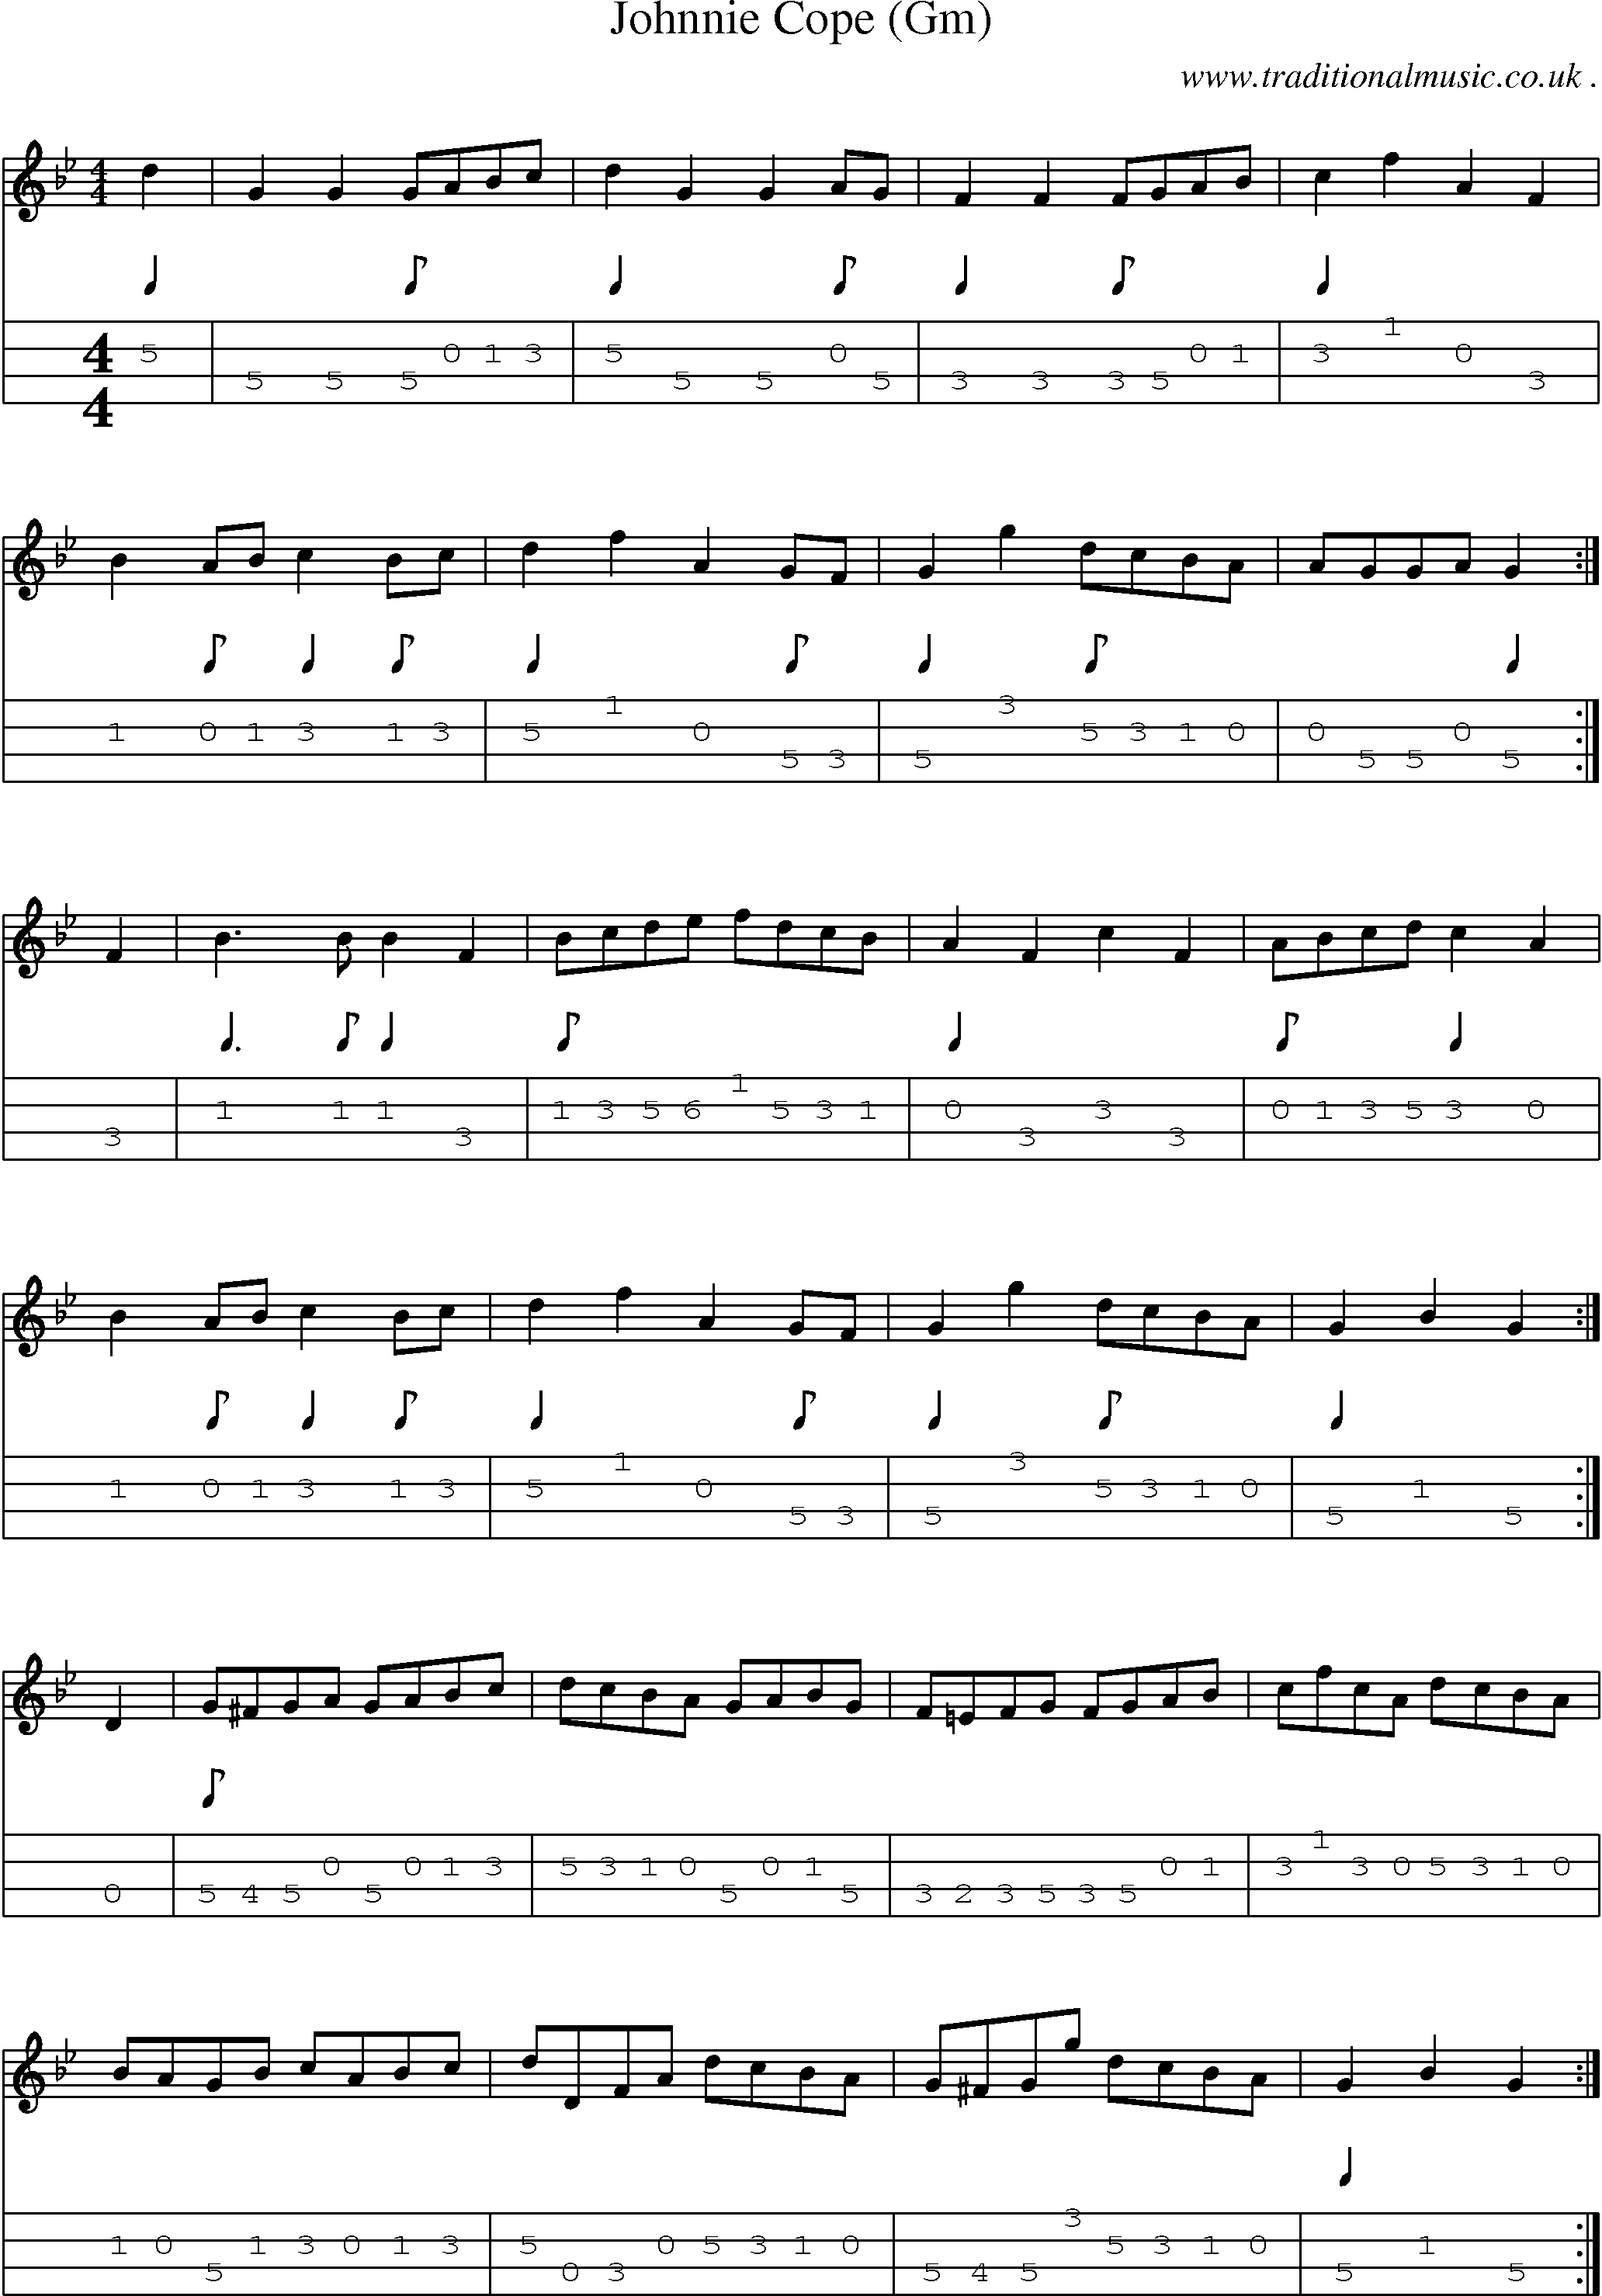 Sheet-music  score, Chords and Mandolin Tabs for Johnnie Cope Gm